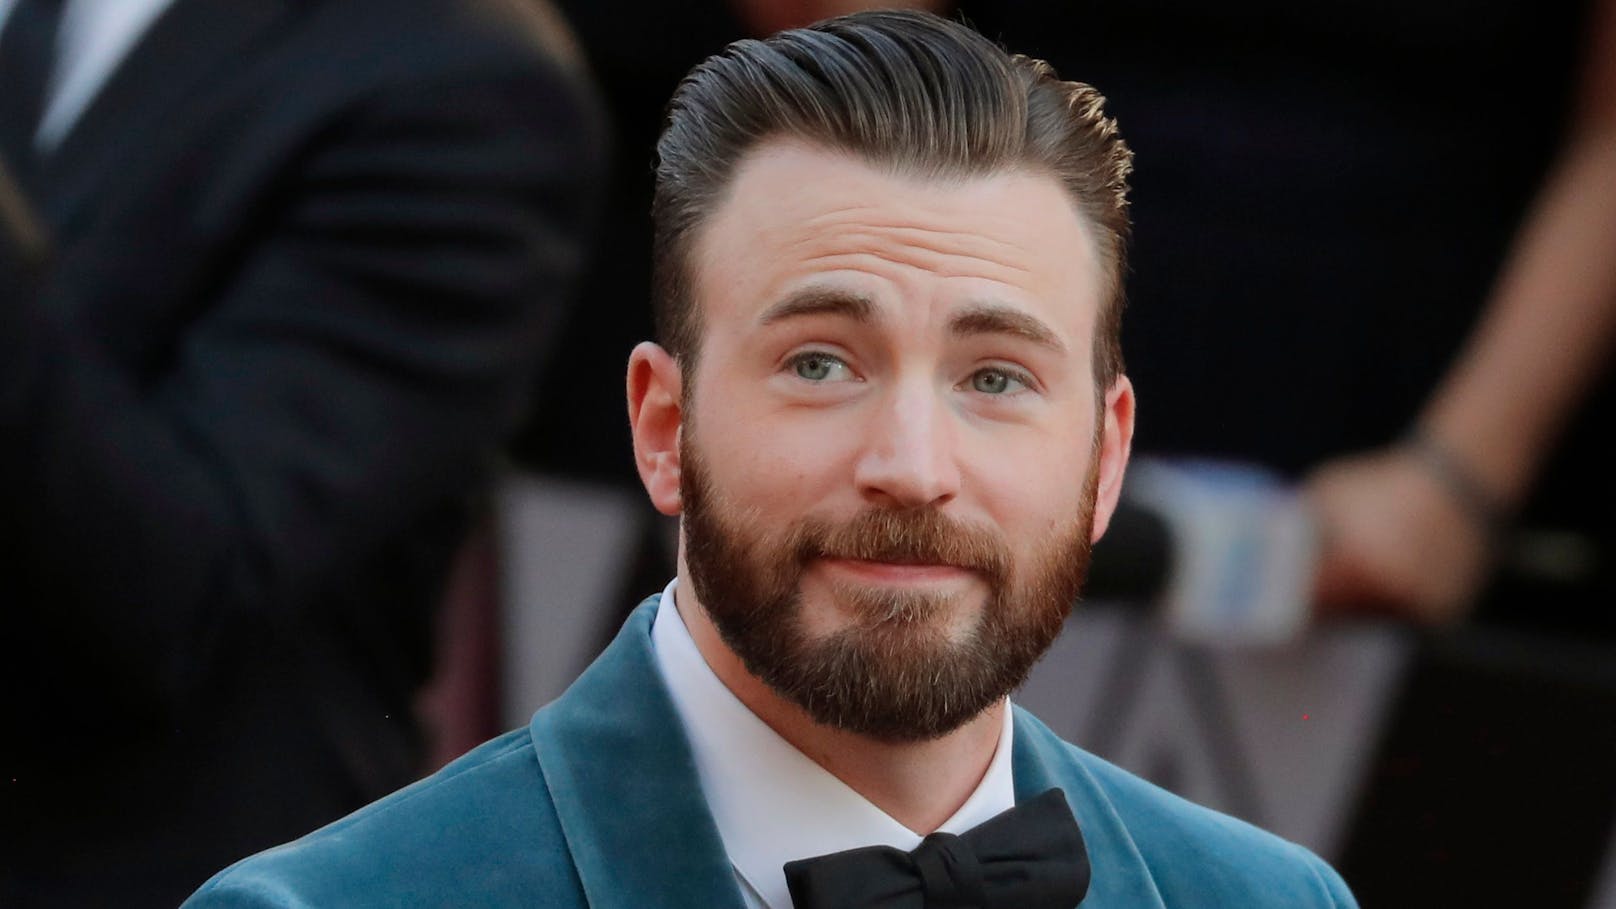 "Captain America" <strong>Chris Evans</strong> soll geheiratet haben.